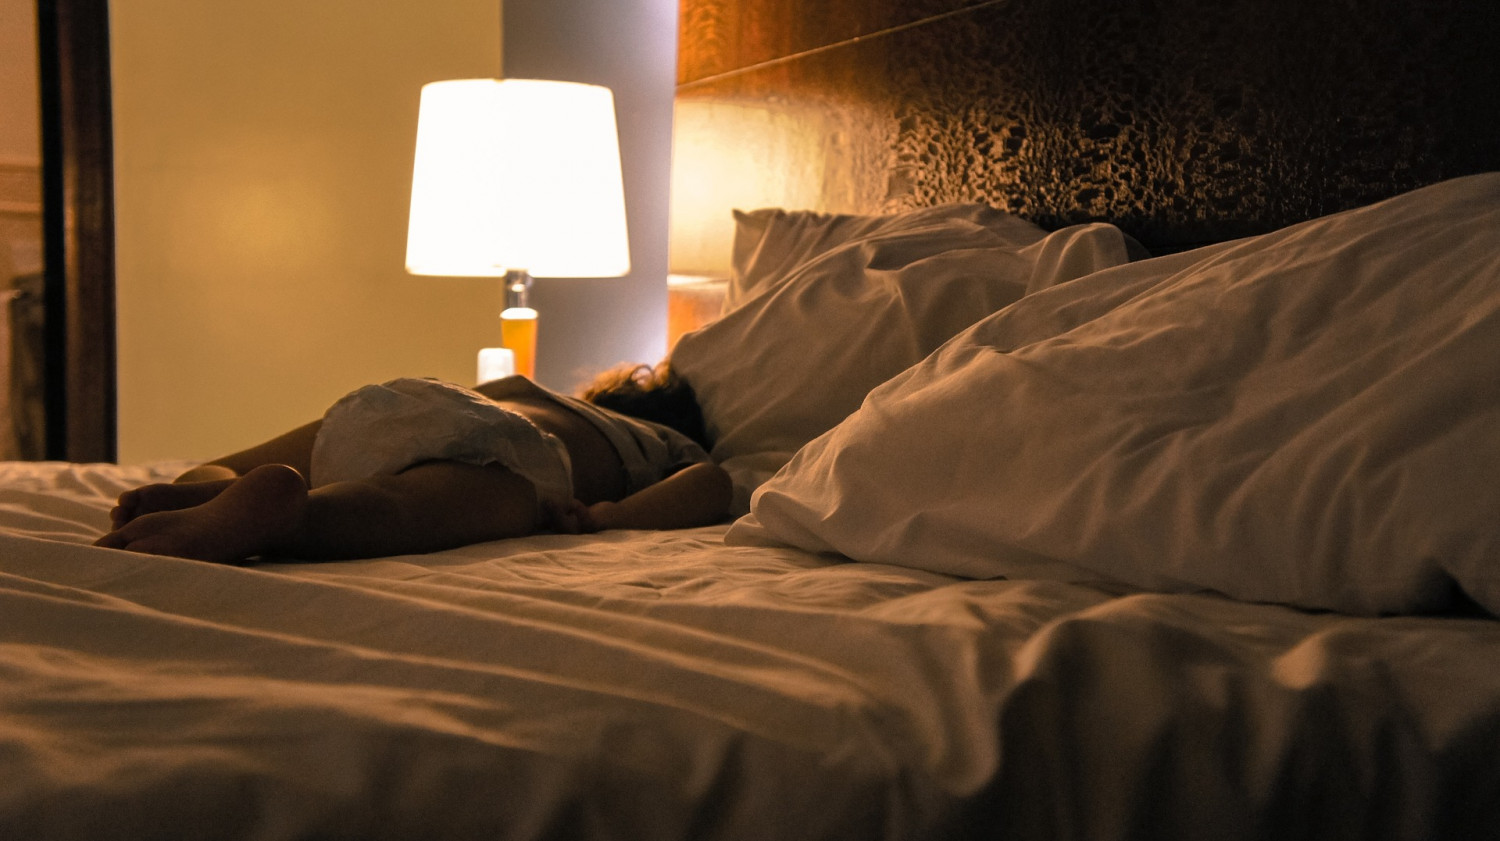 Sleeping With Lights on and Weight Gain in Women Linked in New Study